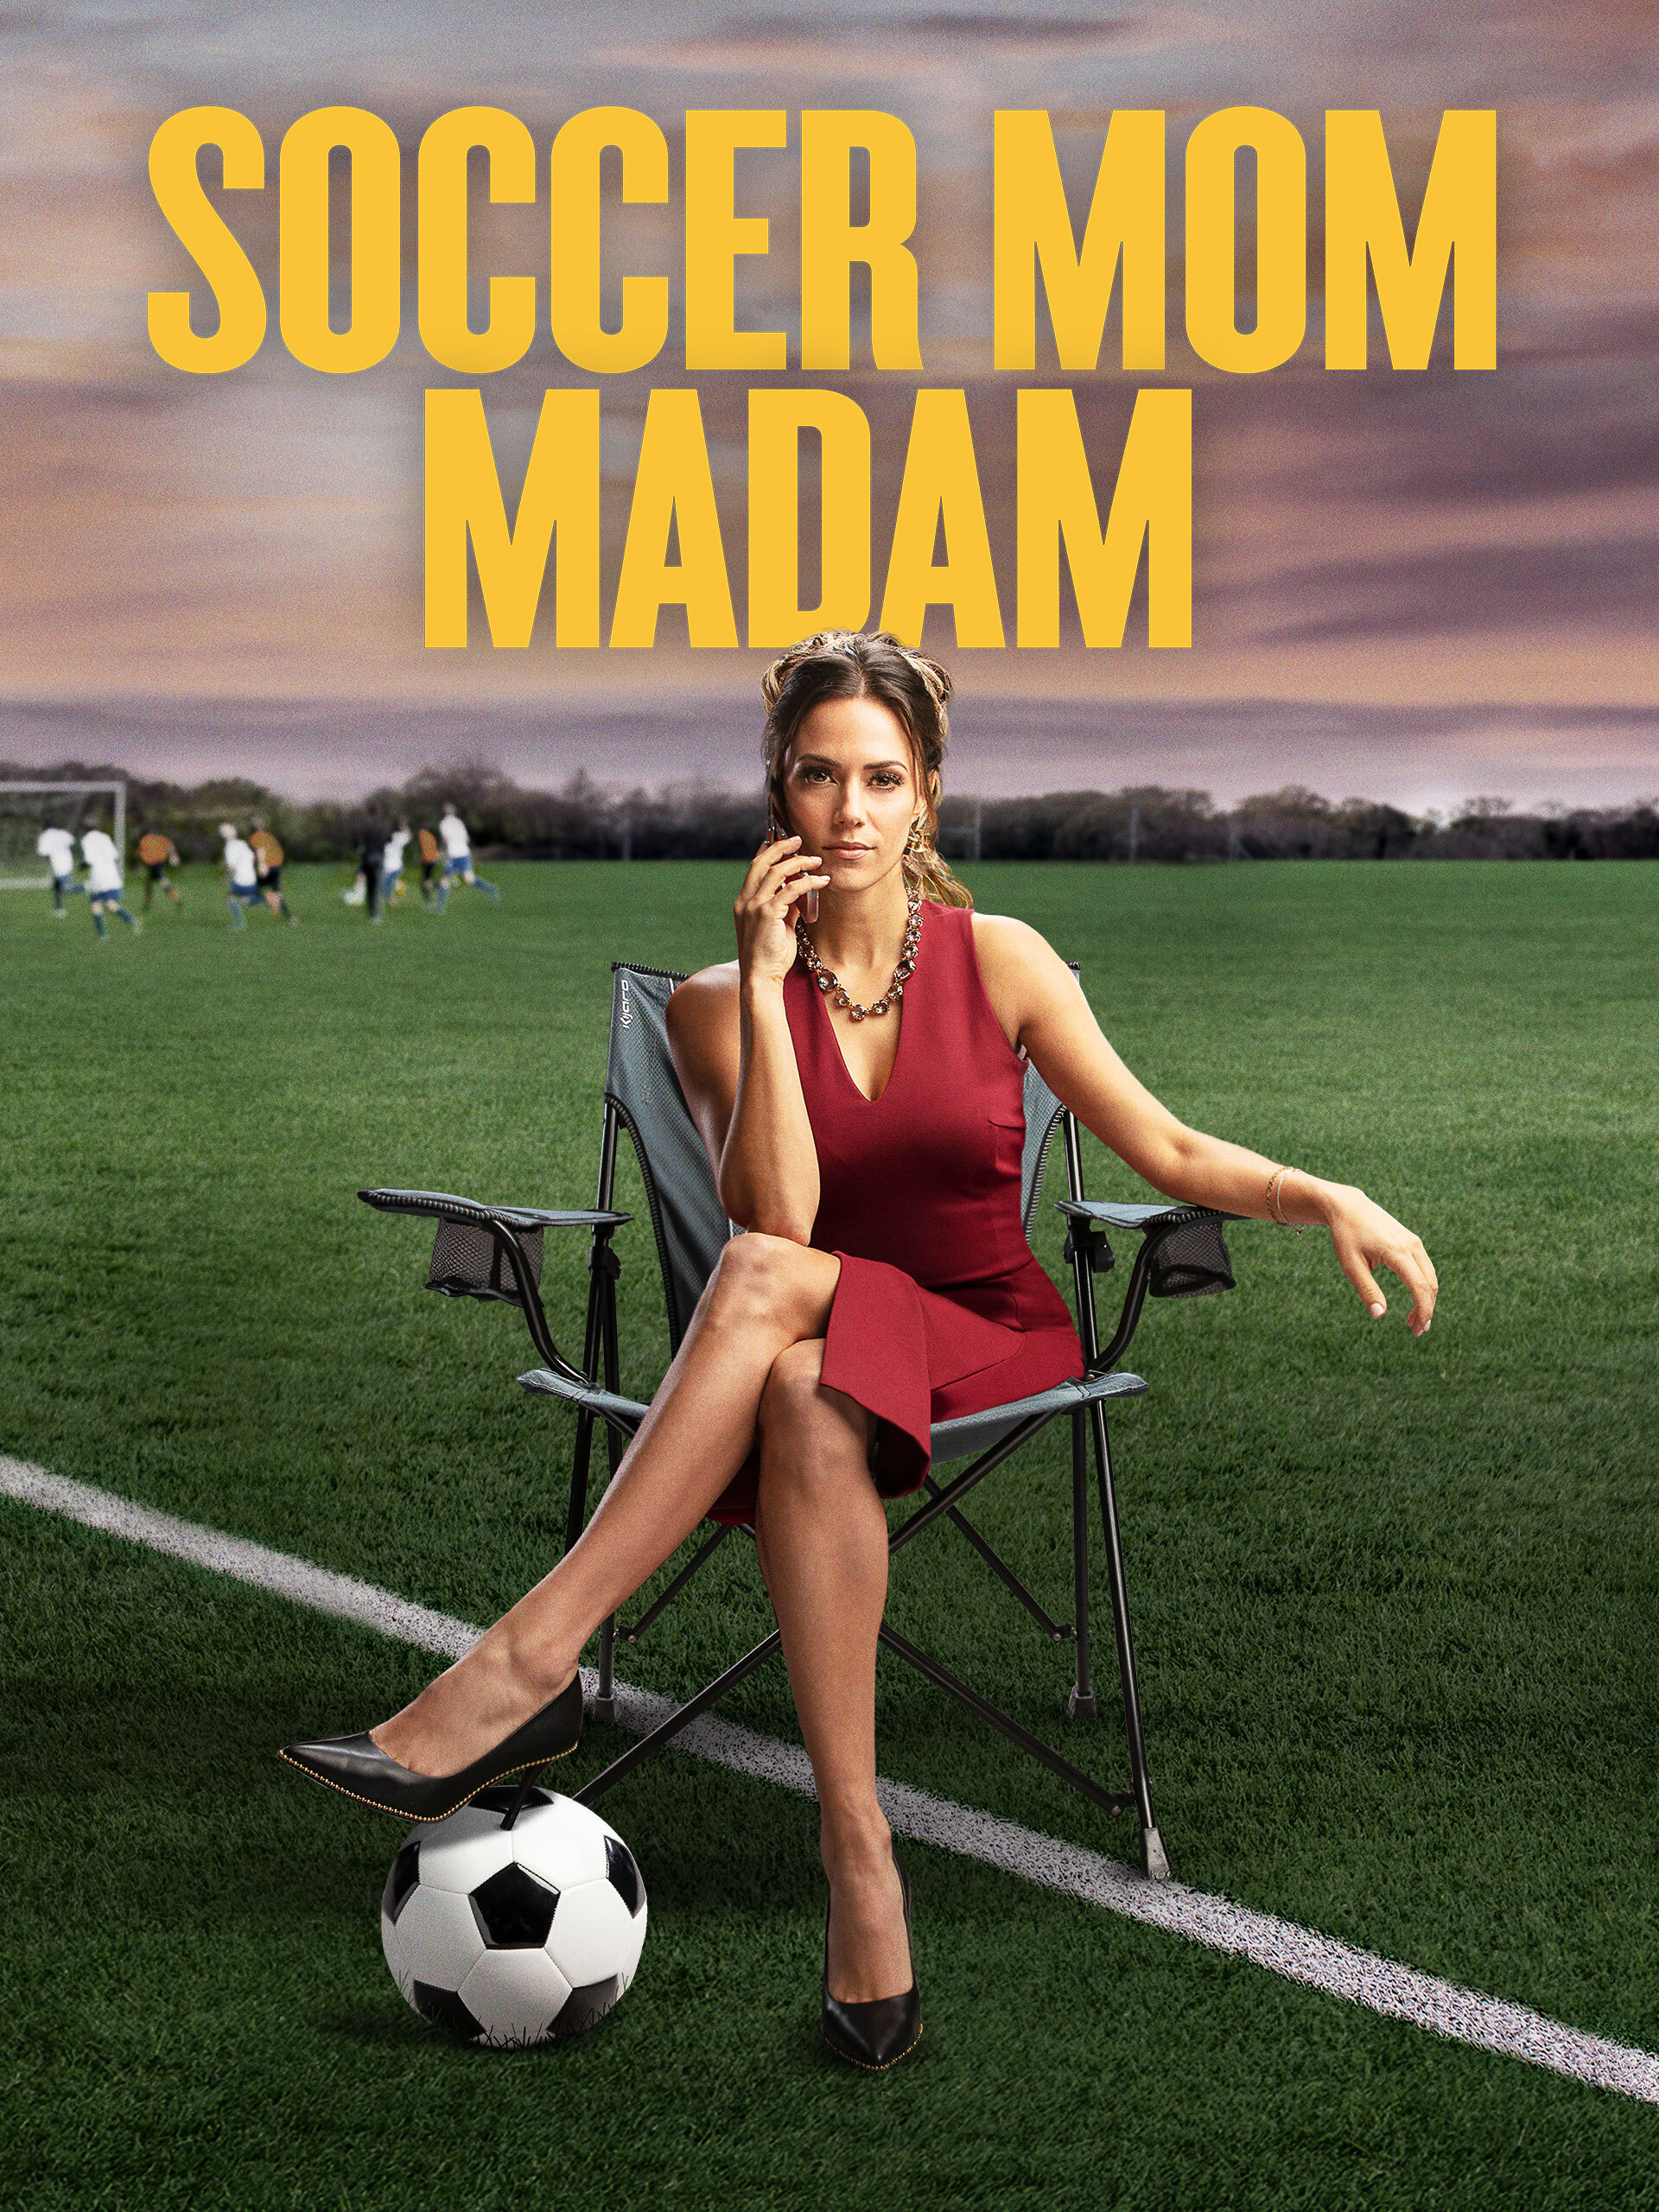 anthony abi zeid recommends soccer mom full movie pic